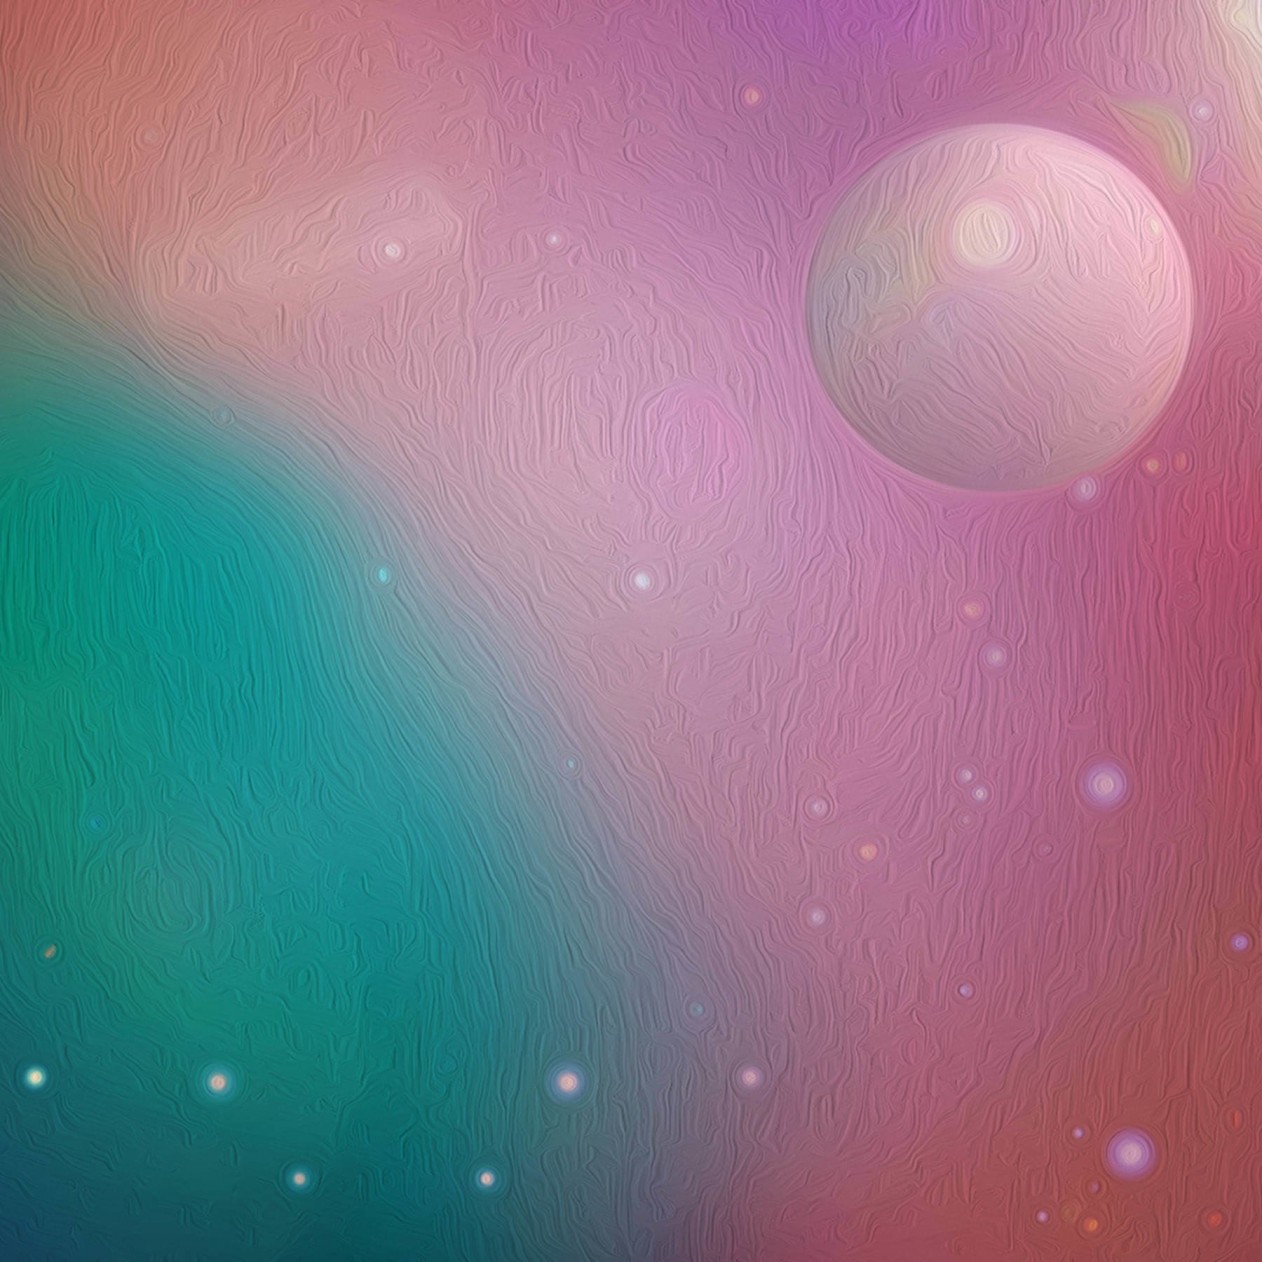 Outer Space Oil Painting Wallpaper for Apple iPad mini